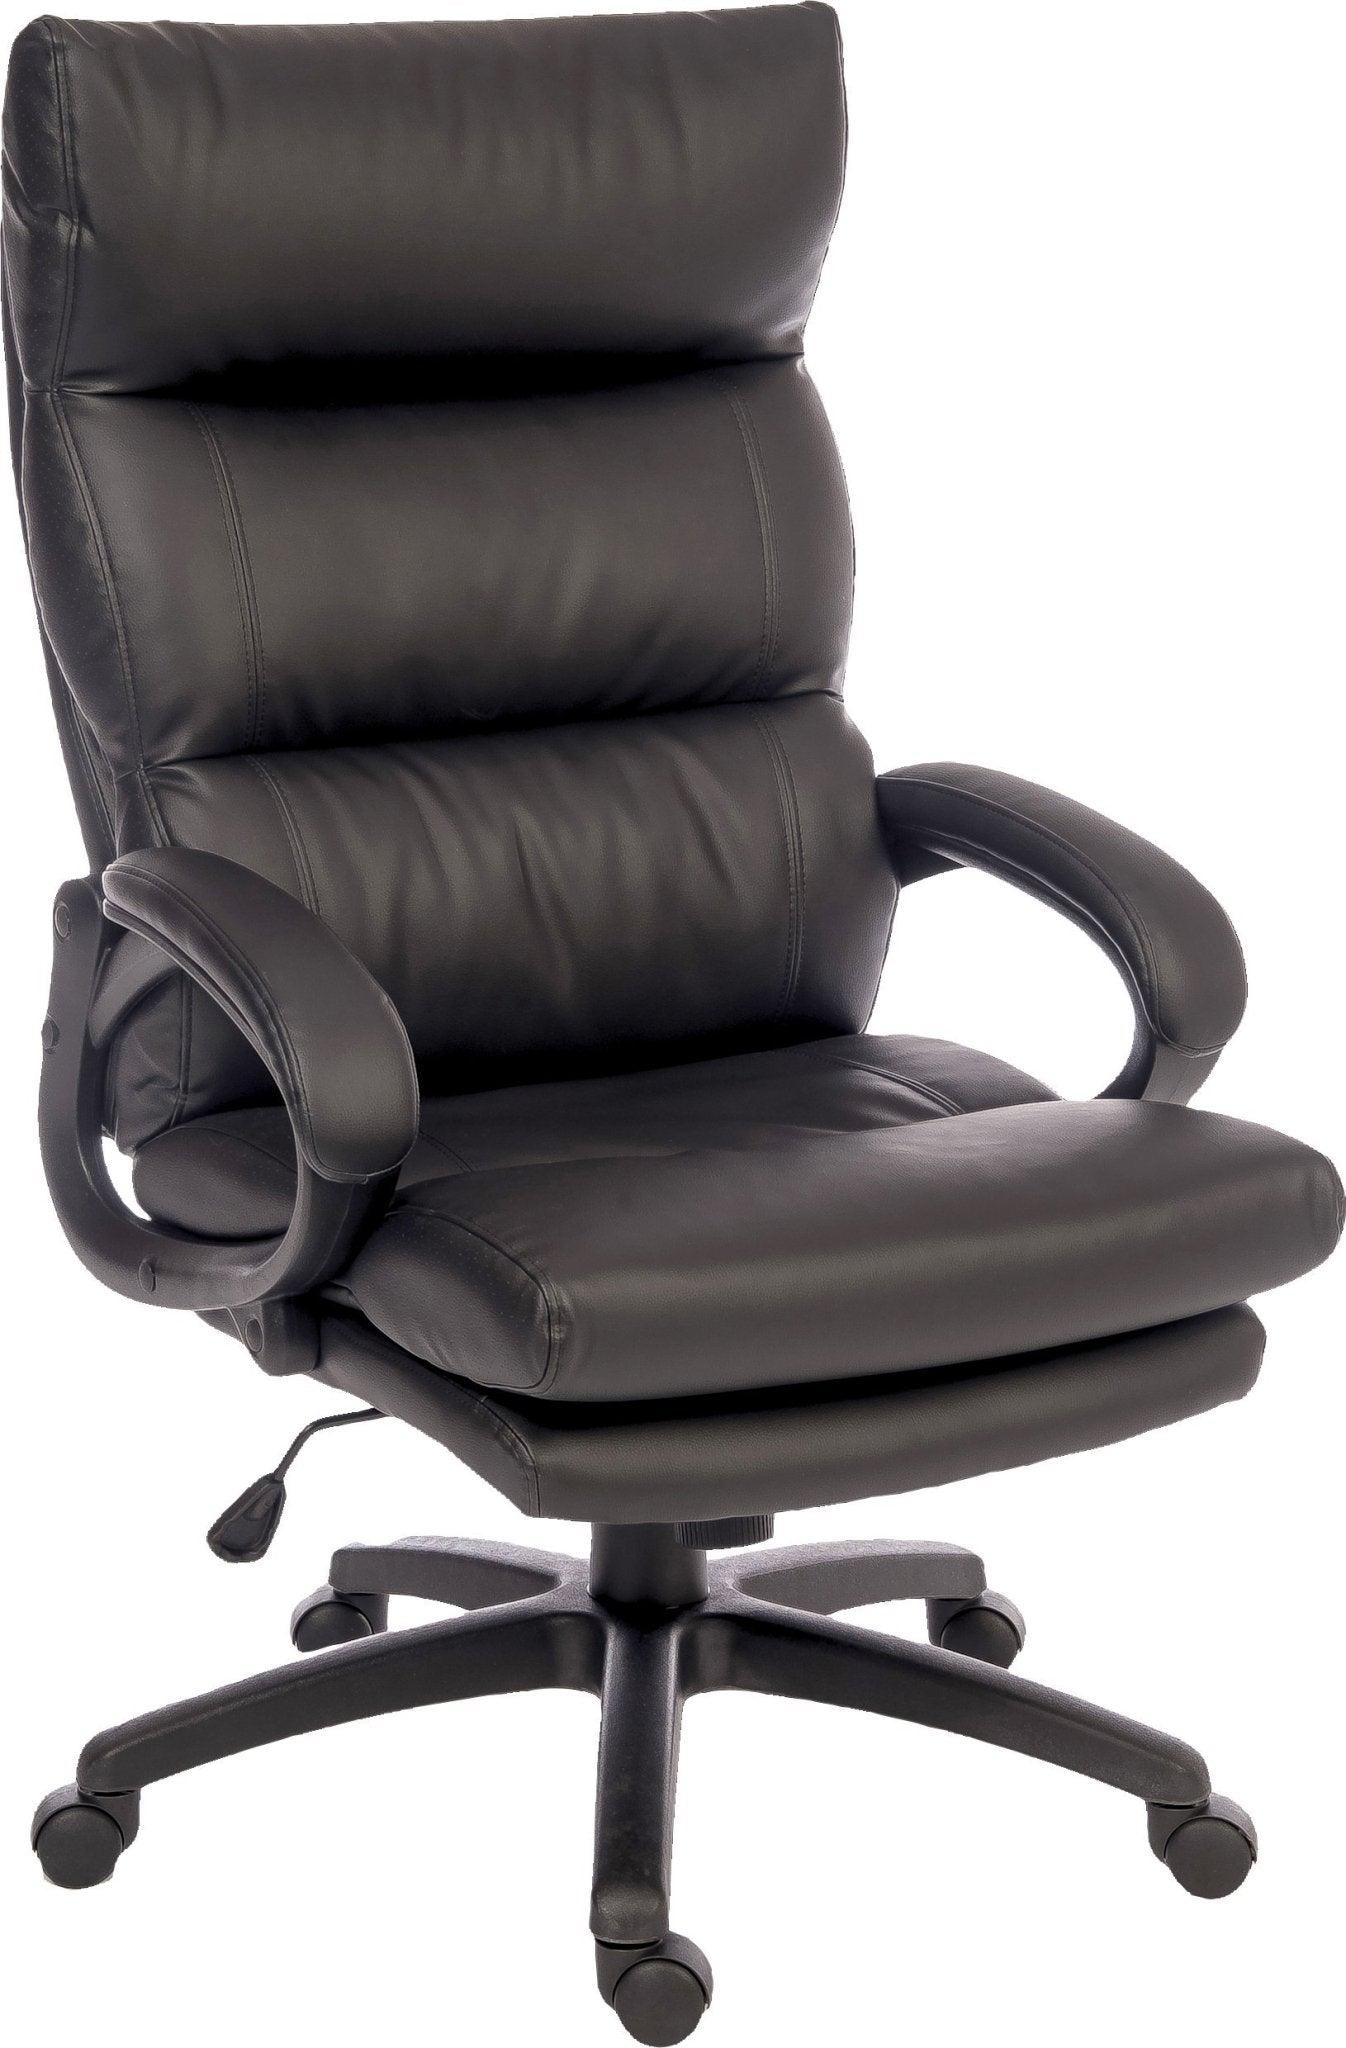 Luxe office chair - image 1